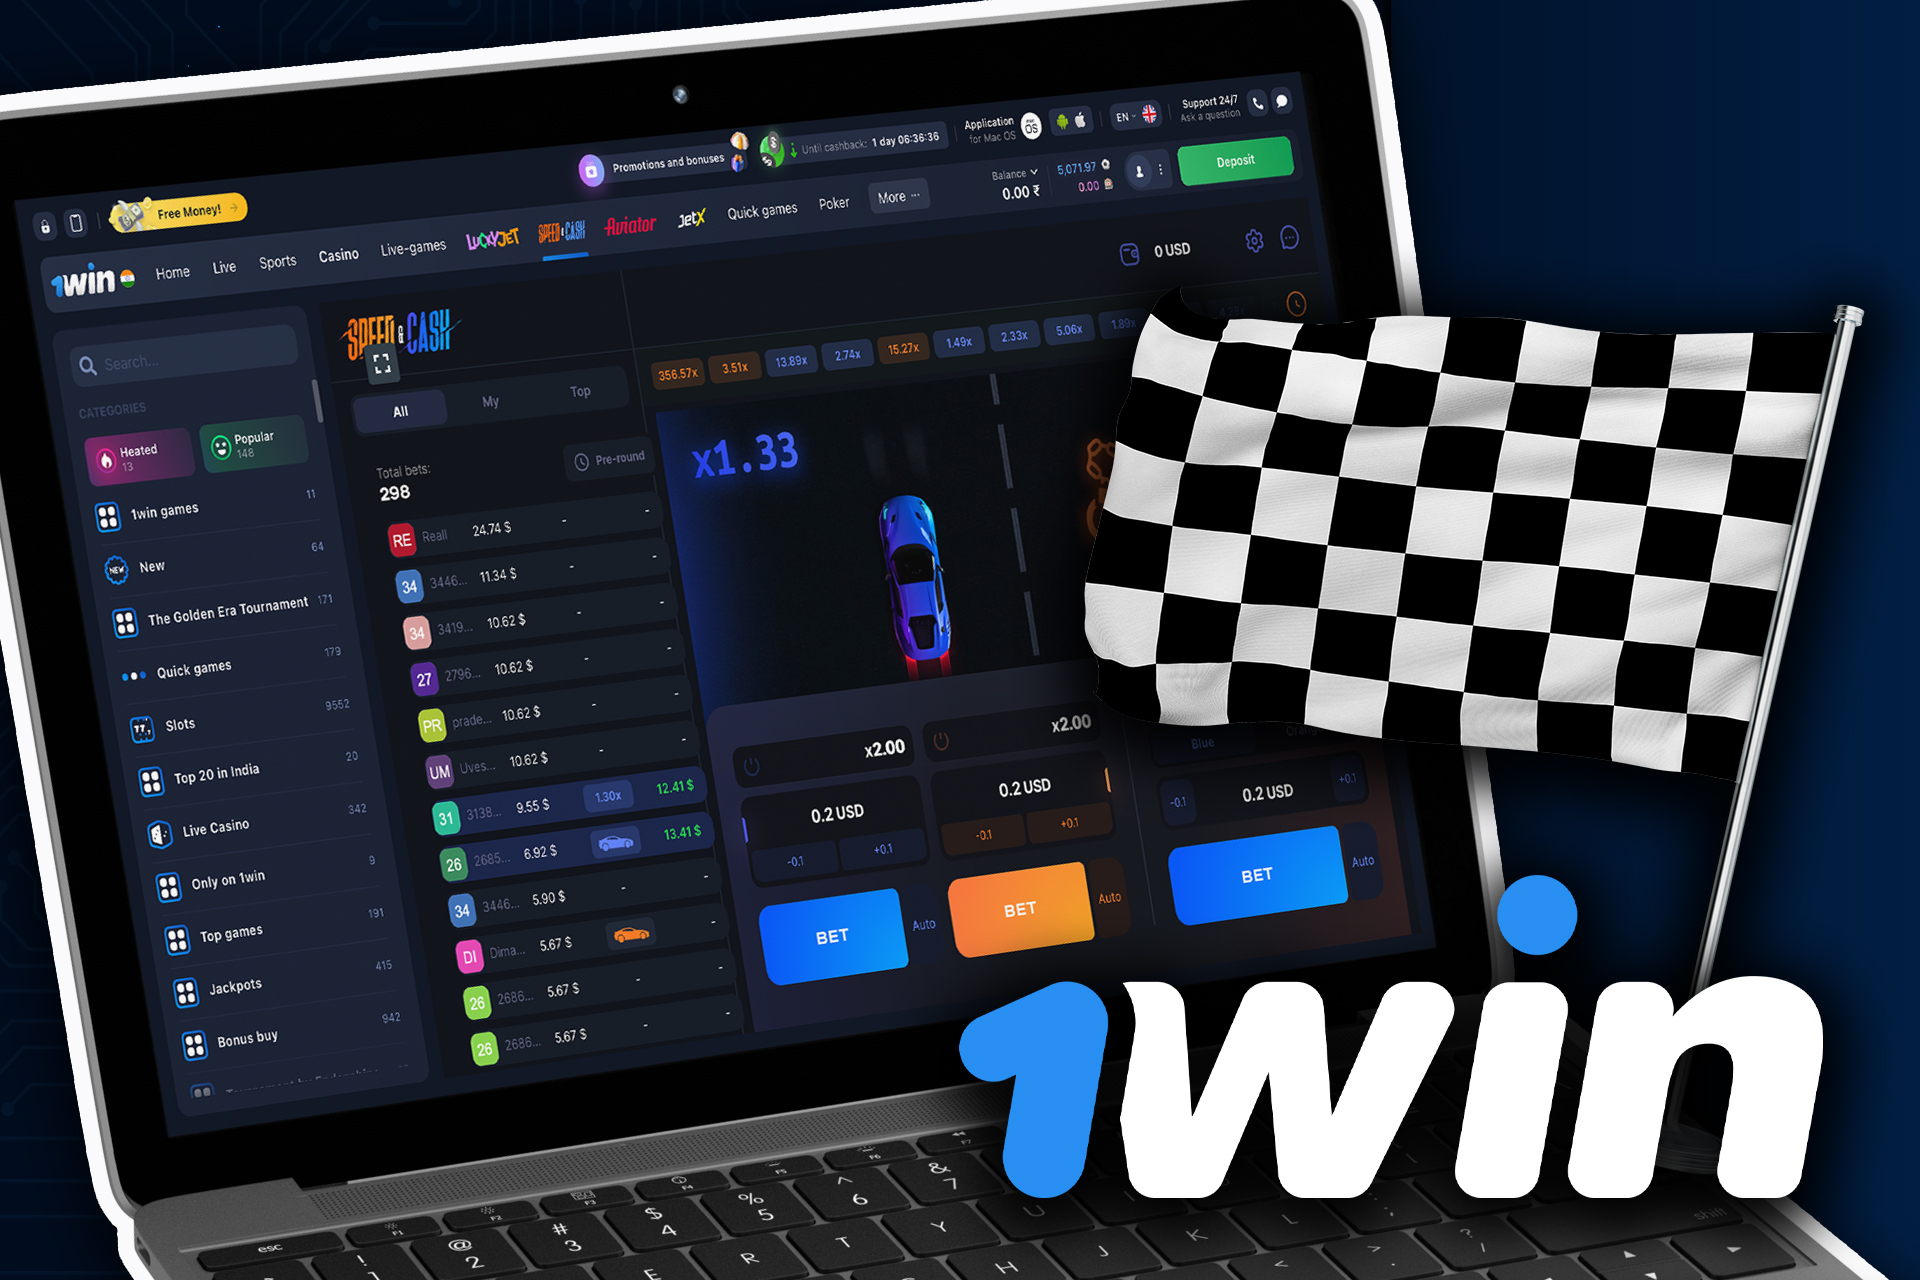 Read our tutorial to play Speed and Cash game on 1win.